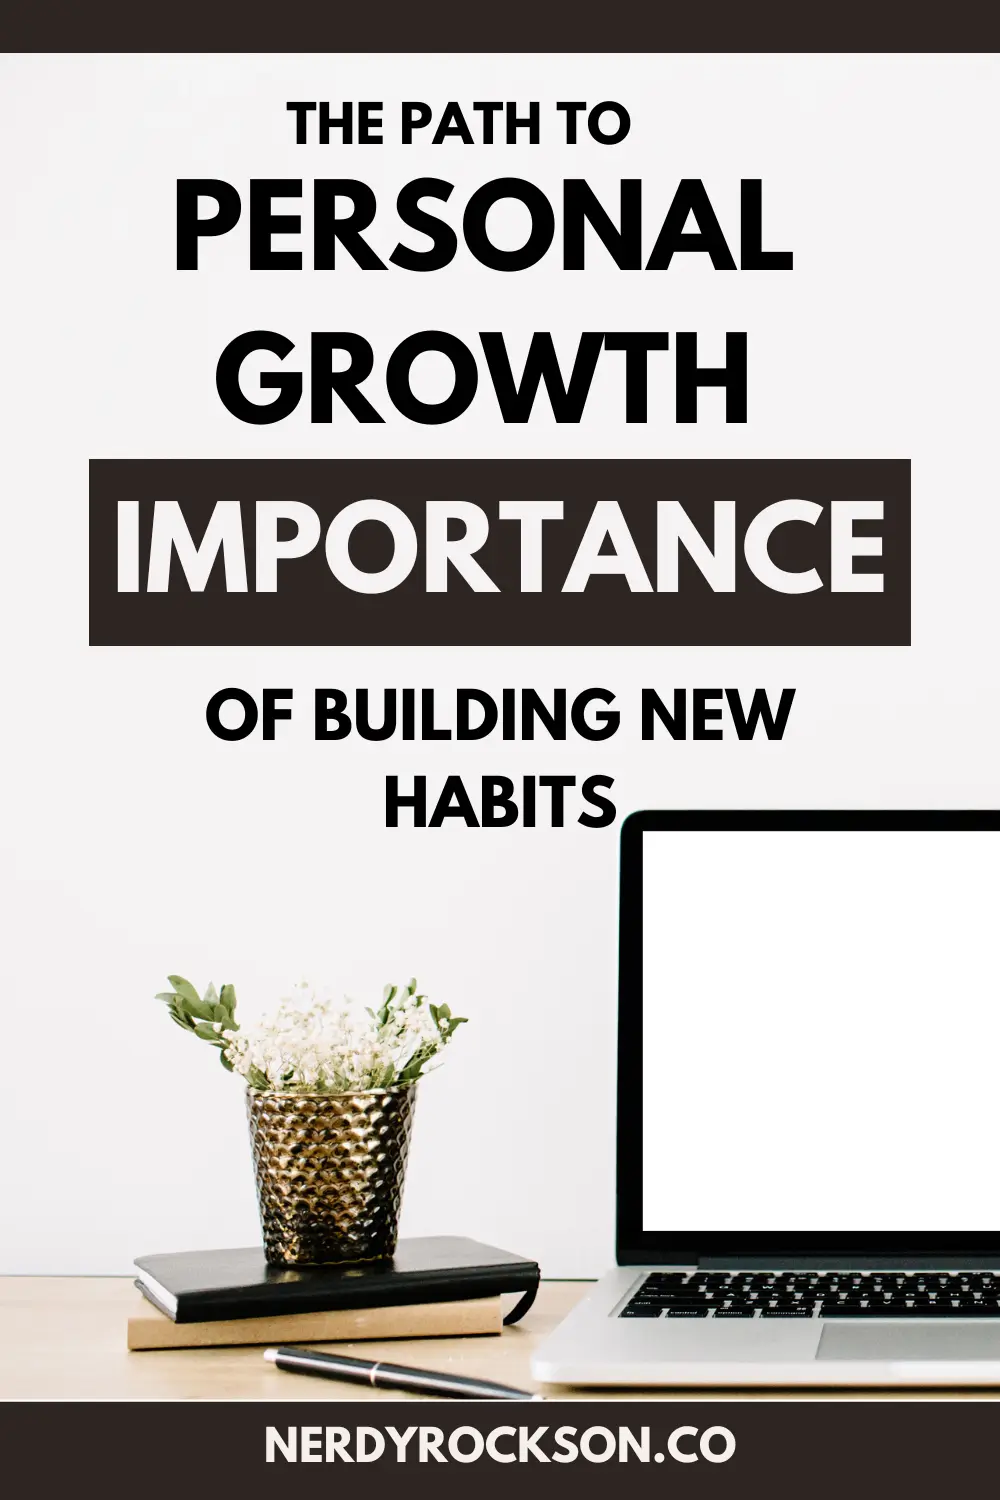 The Power of Habits: How to Form New Habits for Personal Growth